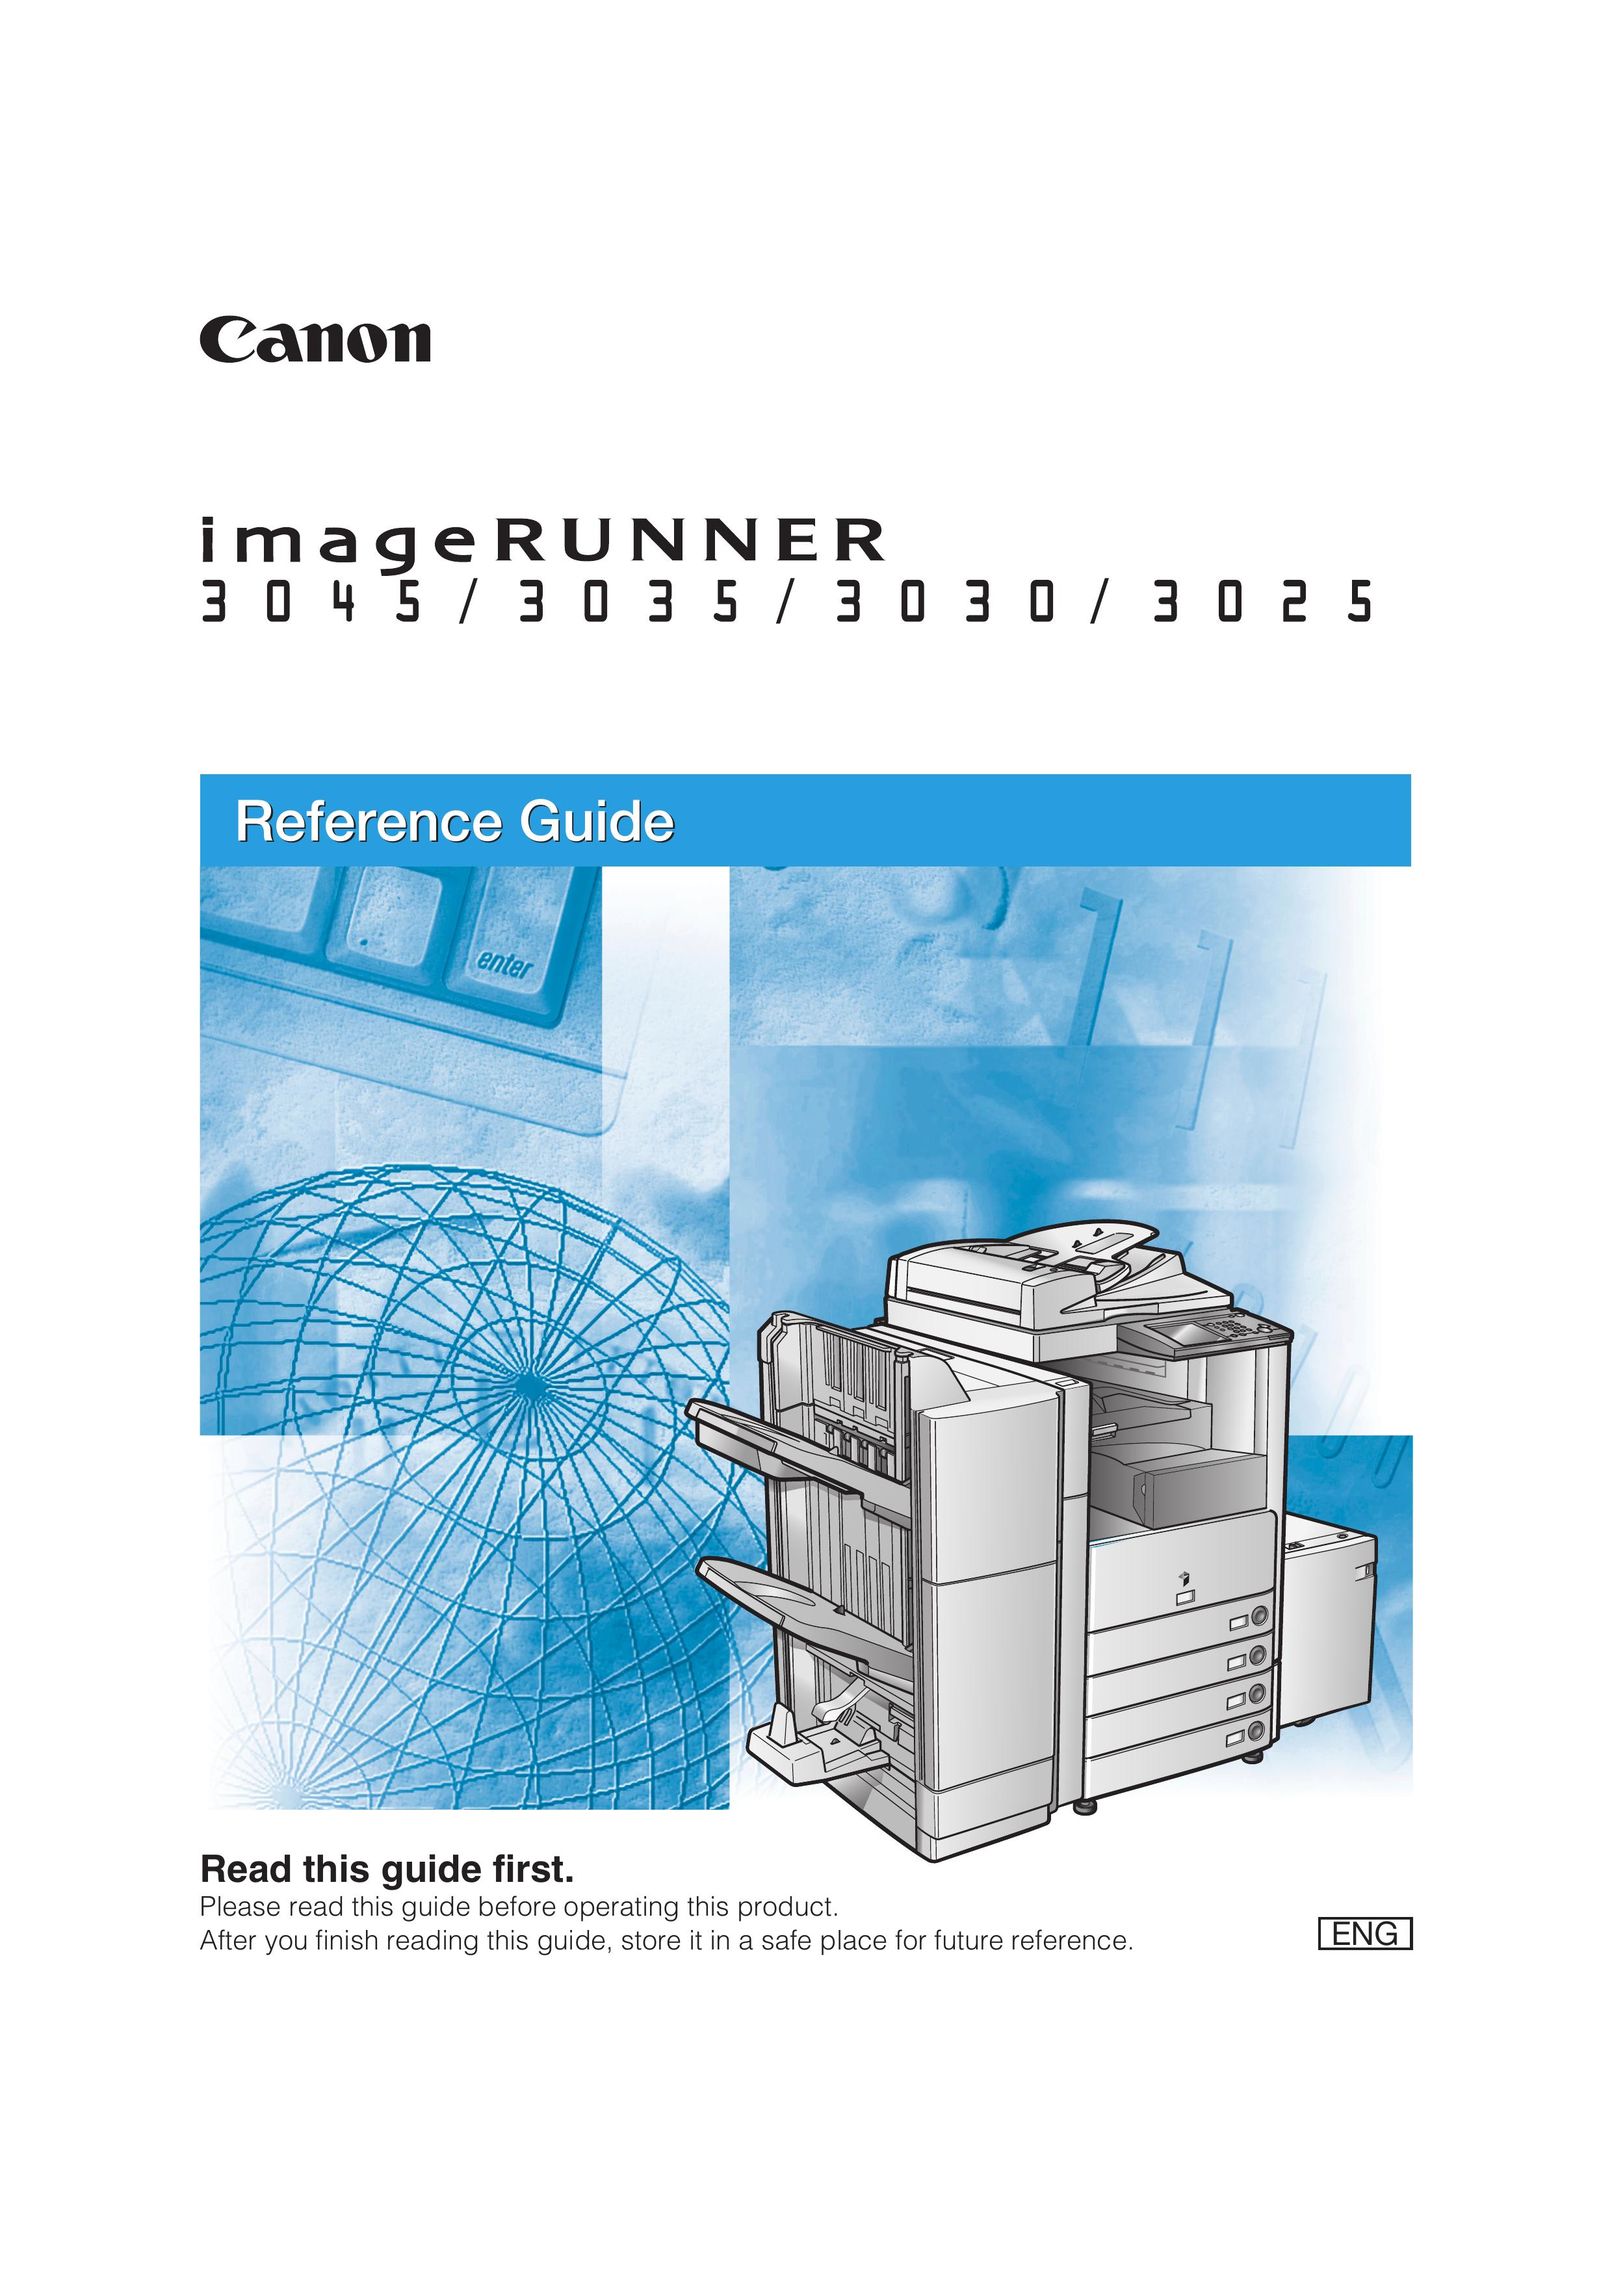 Canon 3030 All in One Printer User Manual